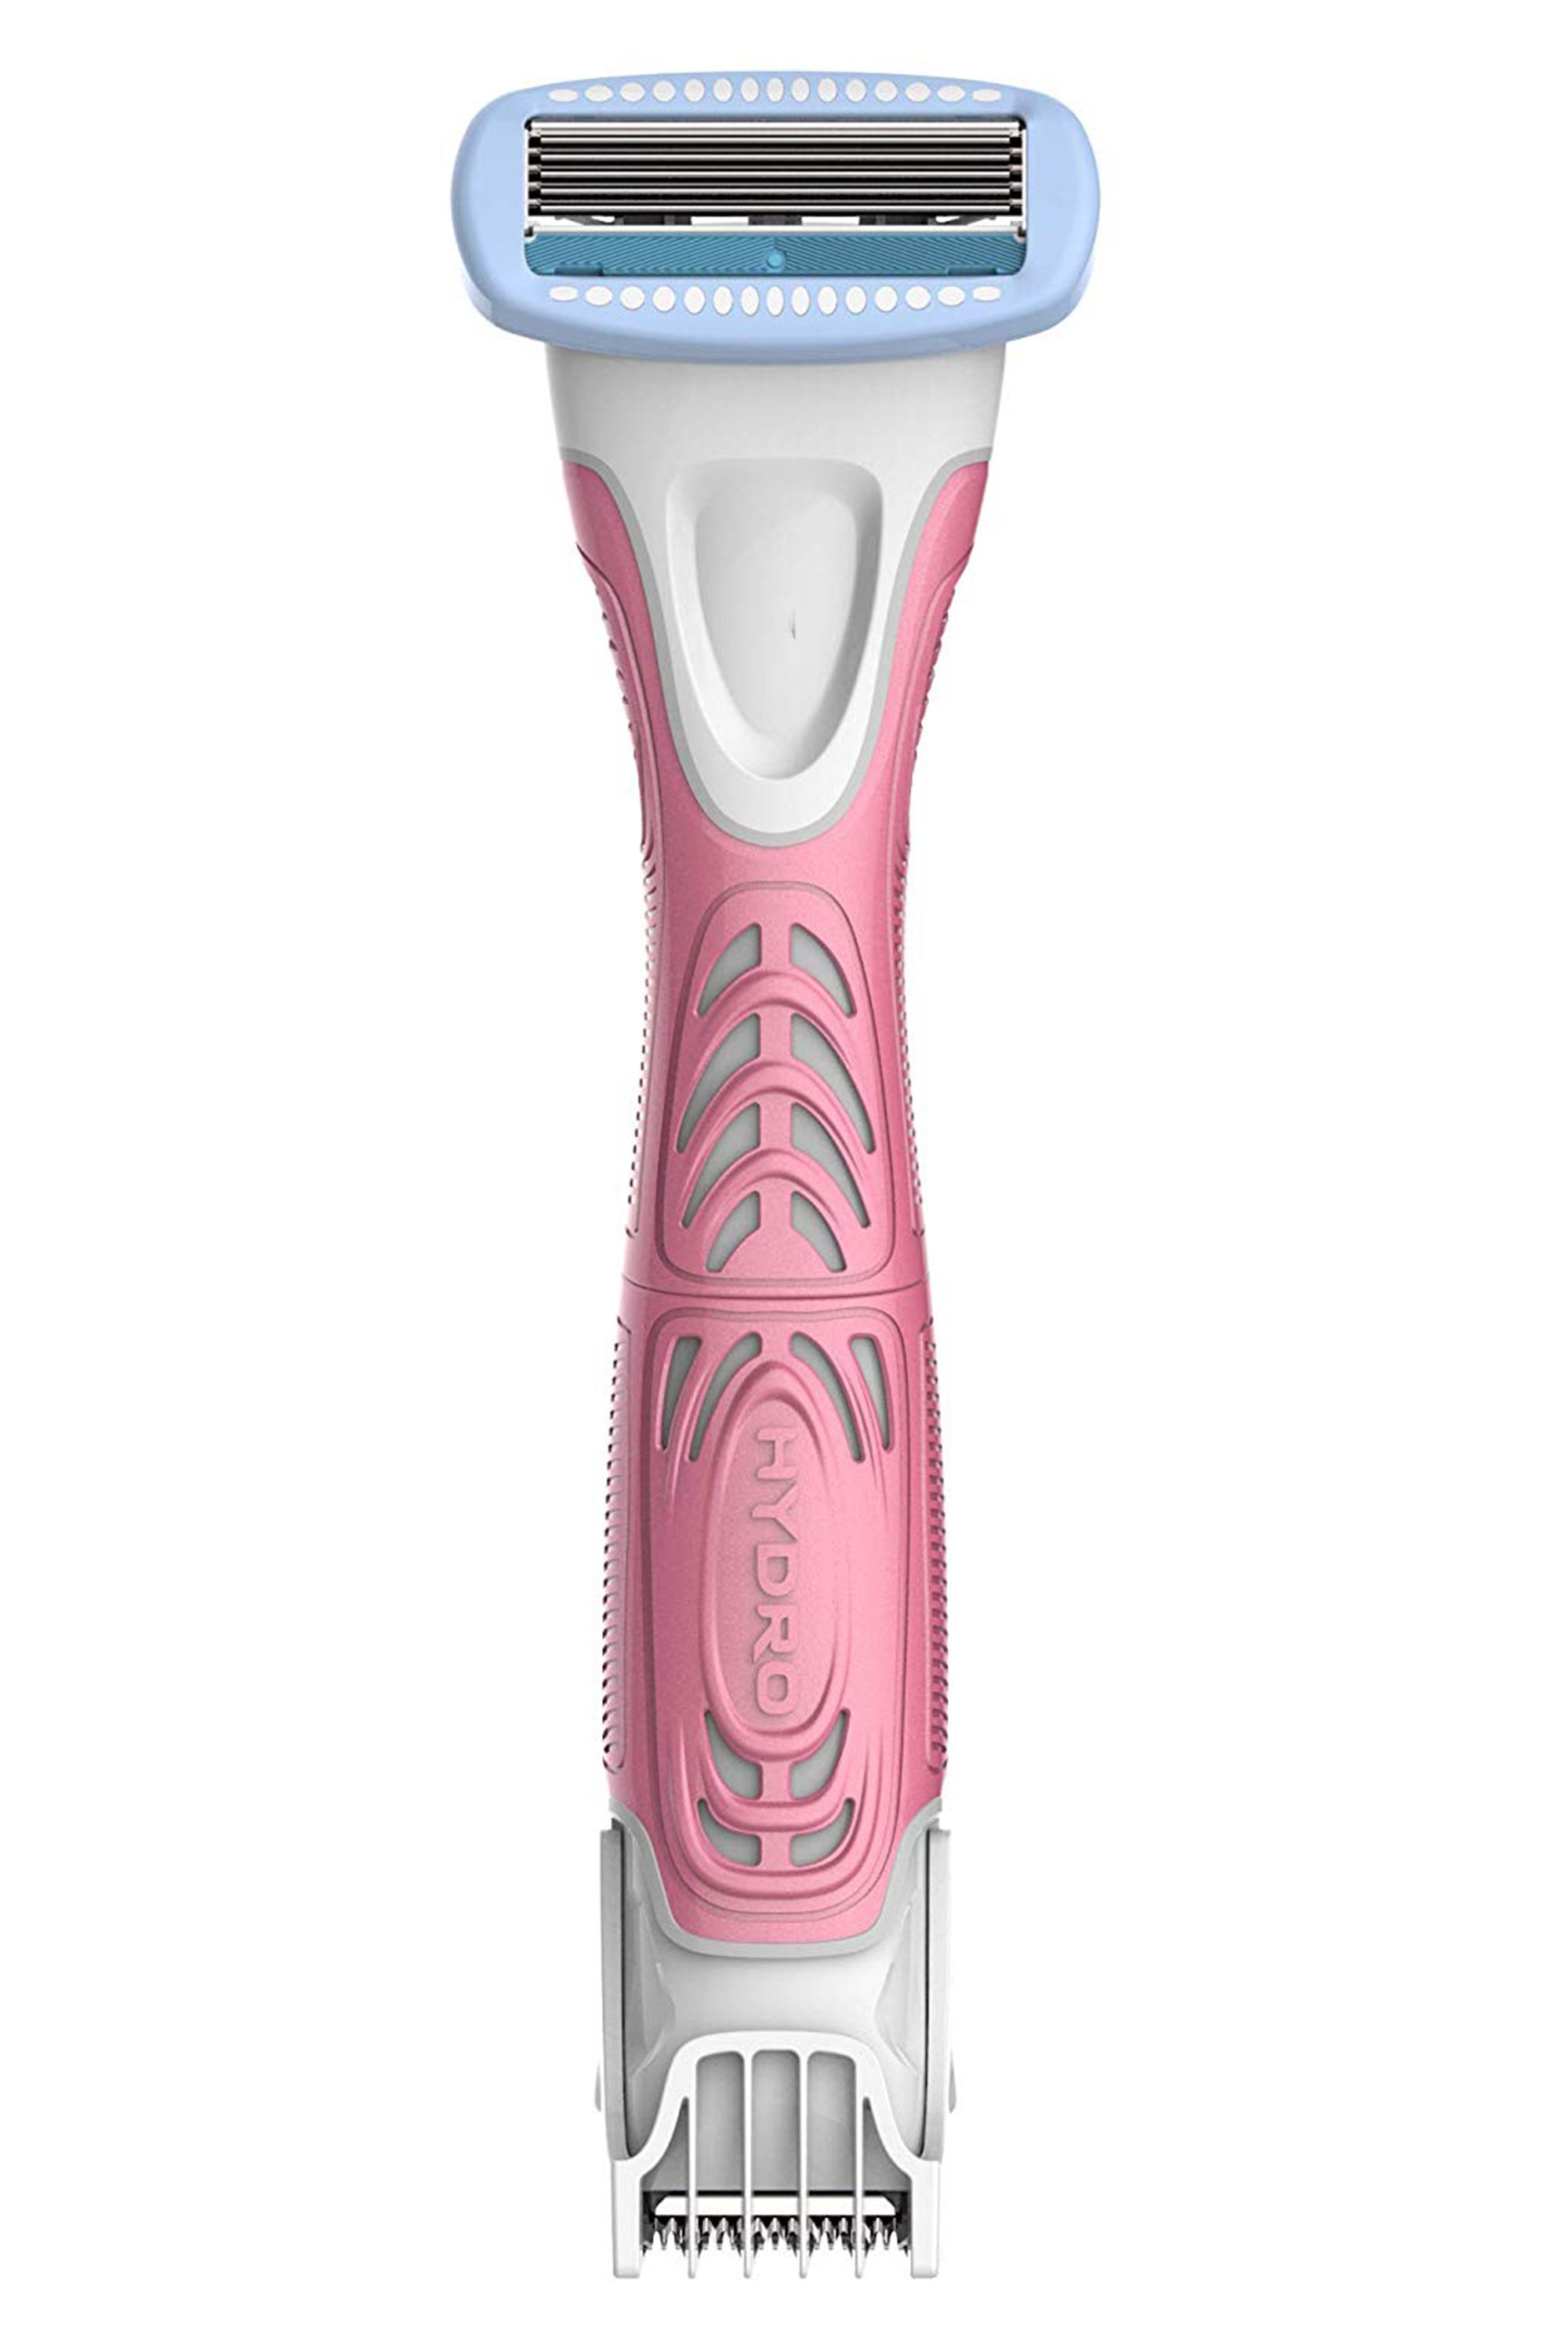 women's personal hair trimmer